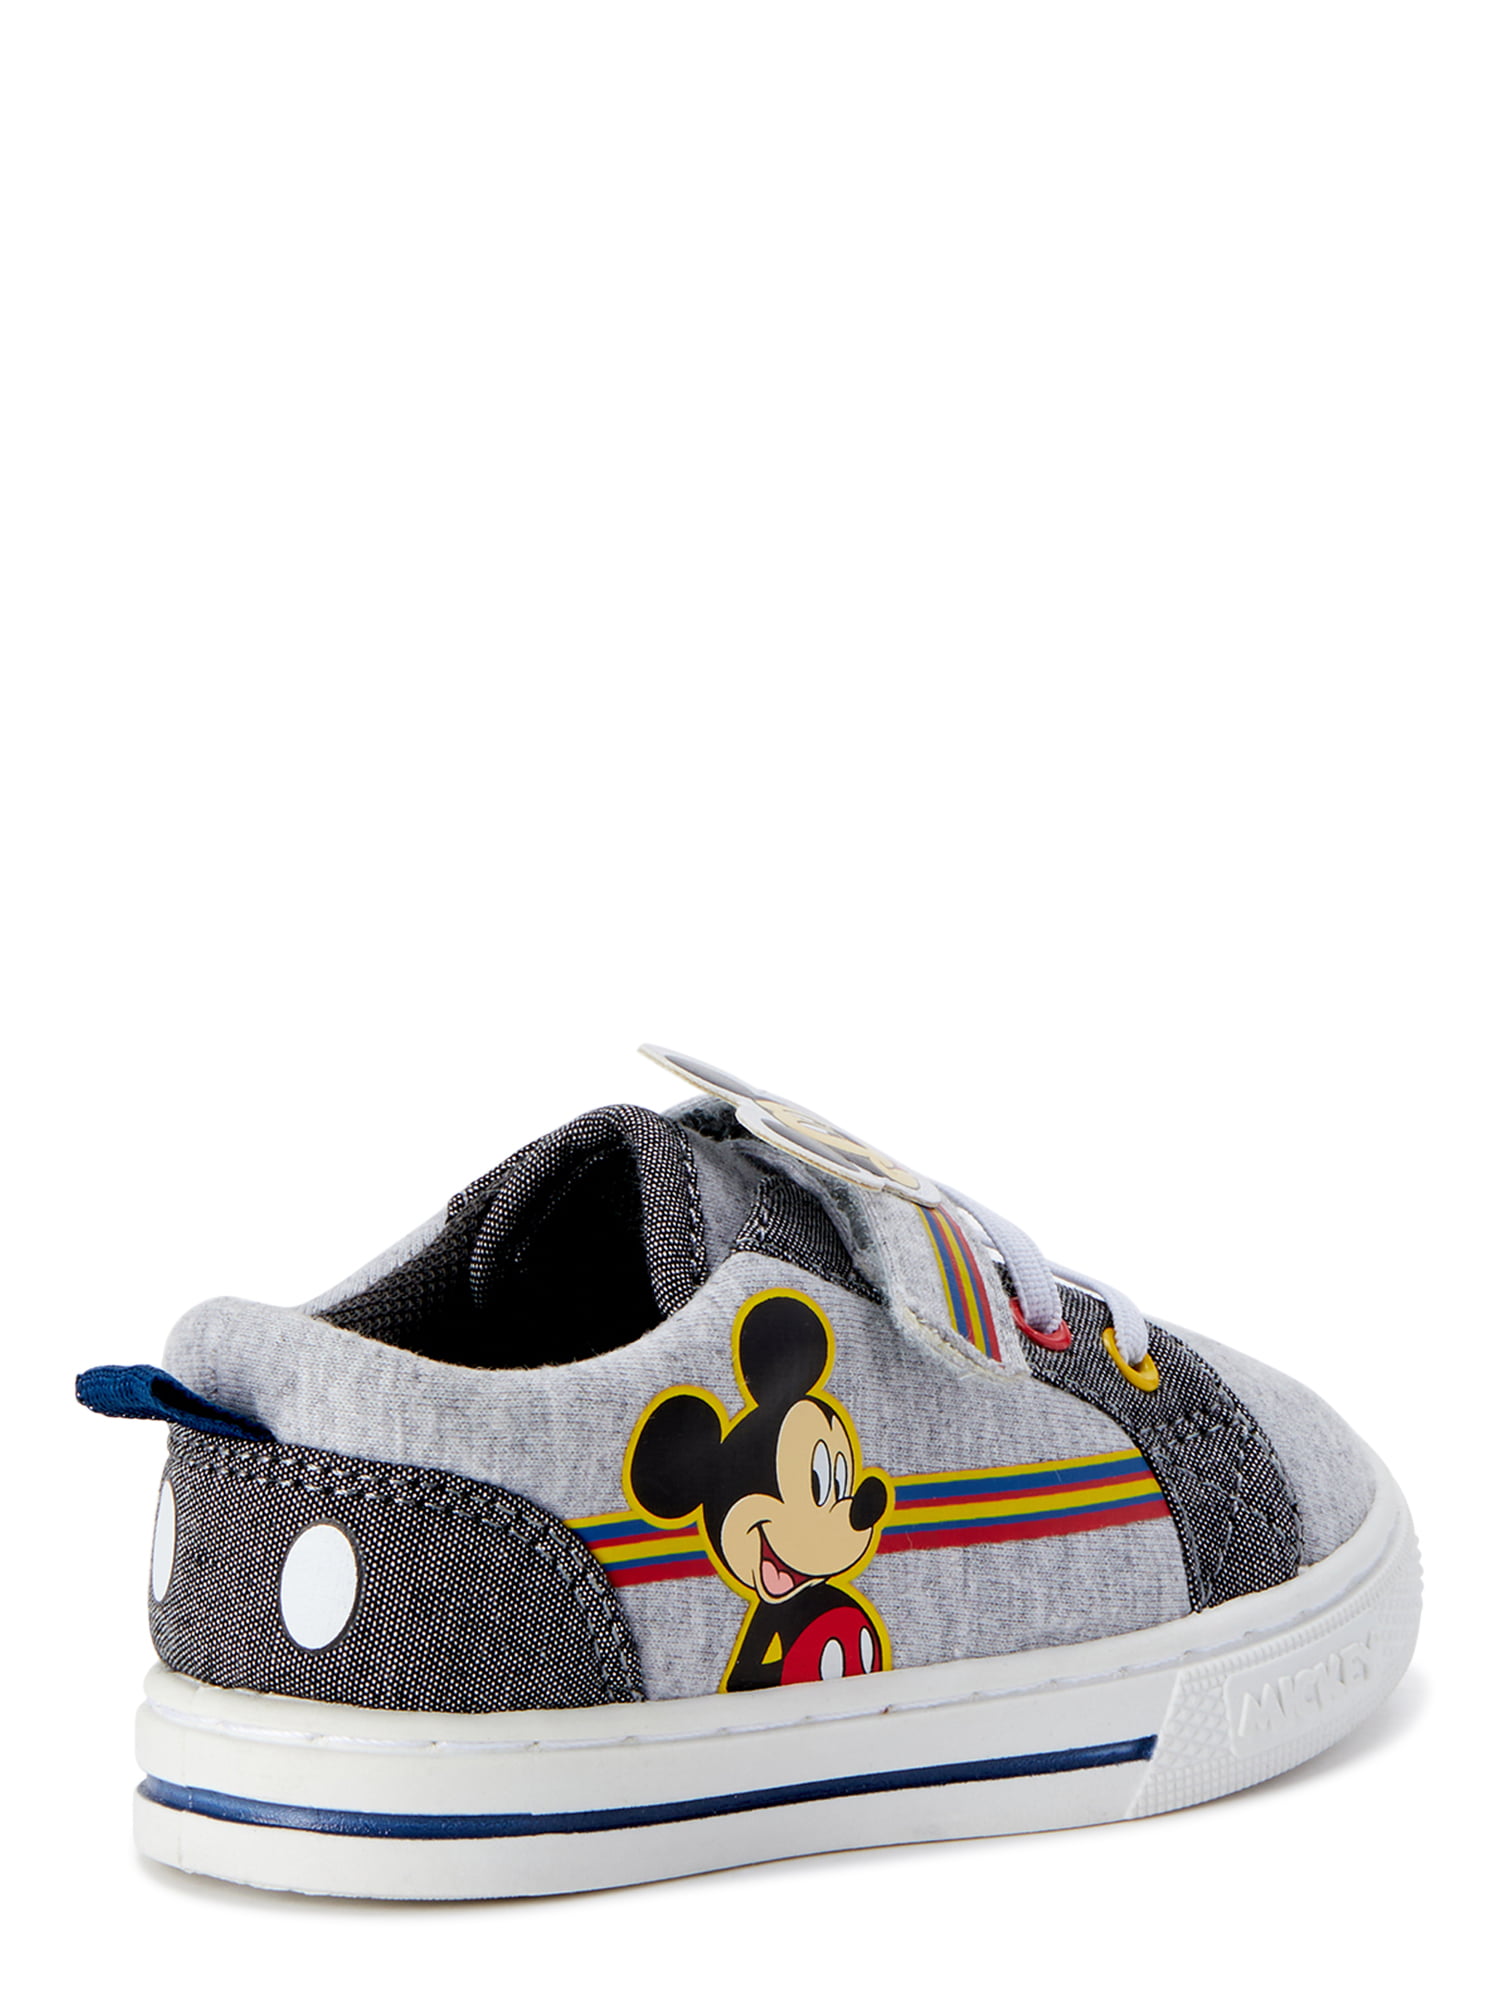 Disney Mickey Mouse Casual Strap Shoe 